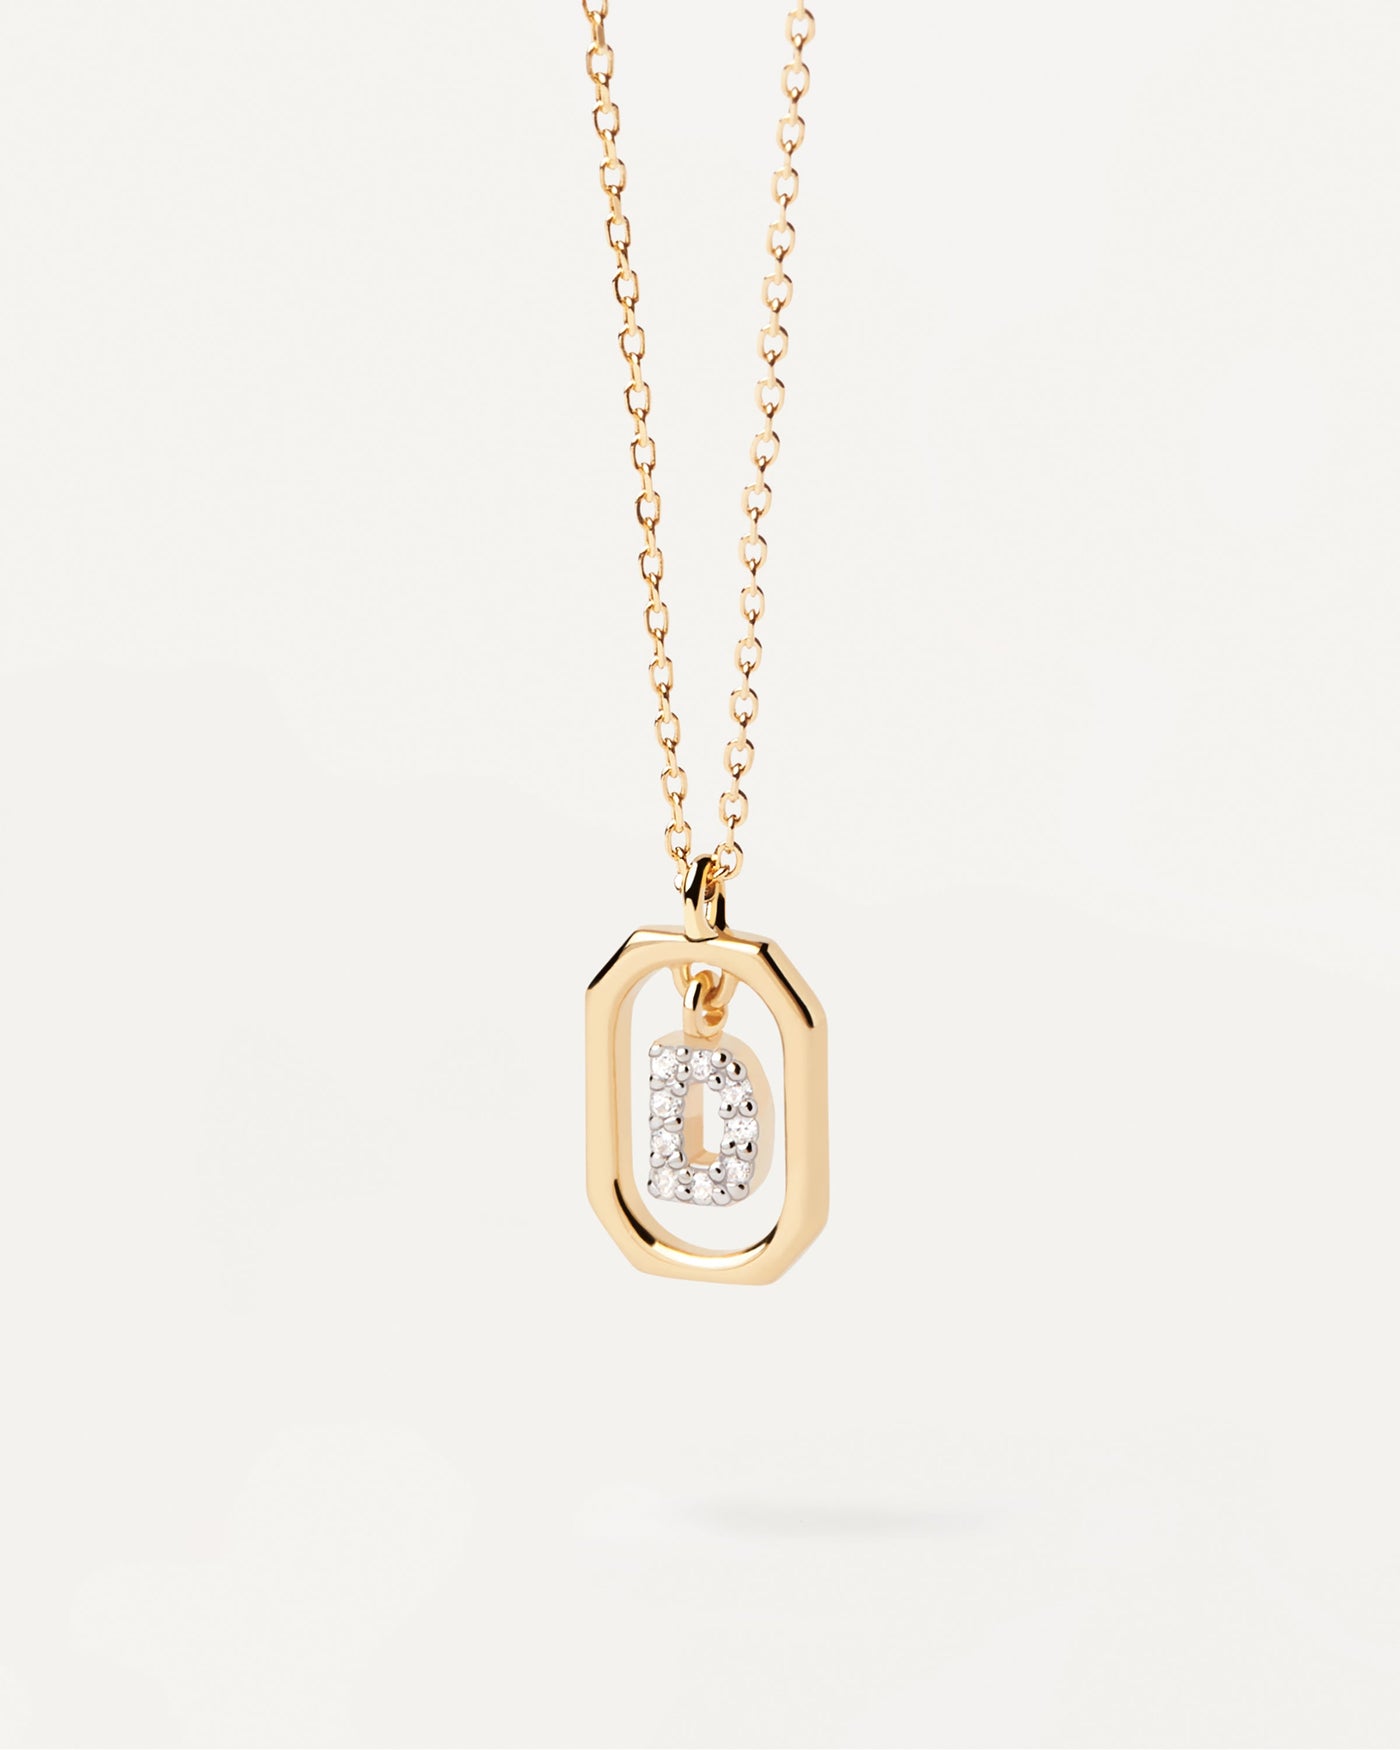 2023 Selection | Mini Letter D Necklace. Small initial D necklace in zirconia inside gold-plated silver octagonal pendant. Get the latest arrival from PDPAOLA. Place your order safely and get this Best Seller. Free Shipping.